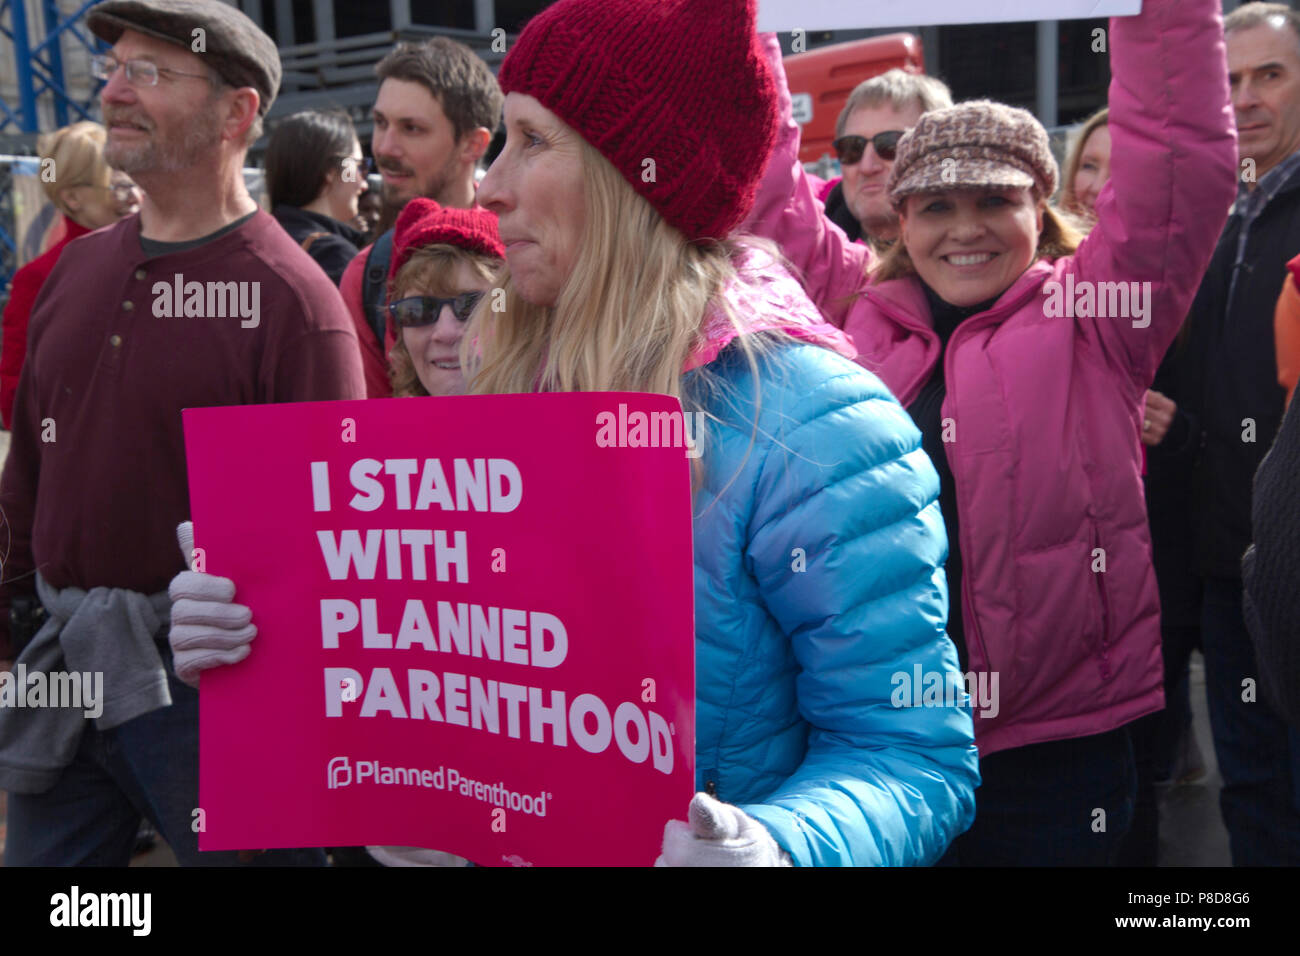 Asheville, North Carolina, USA – January 20, 2018: A female demonstrator in the American 2018 Women's March holds a sign that says 'I STAND WITH PLANN Stock Photo